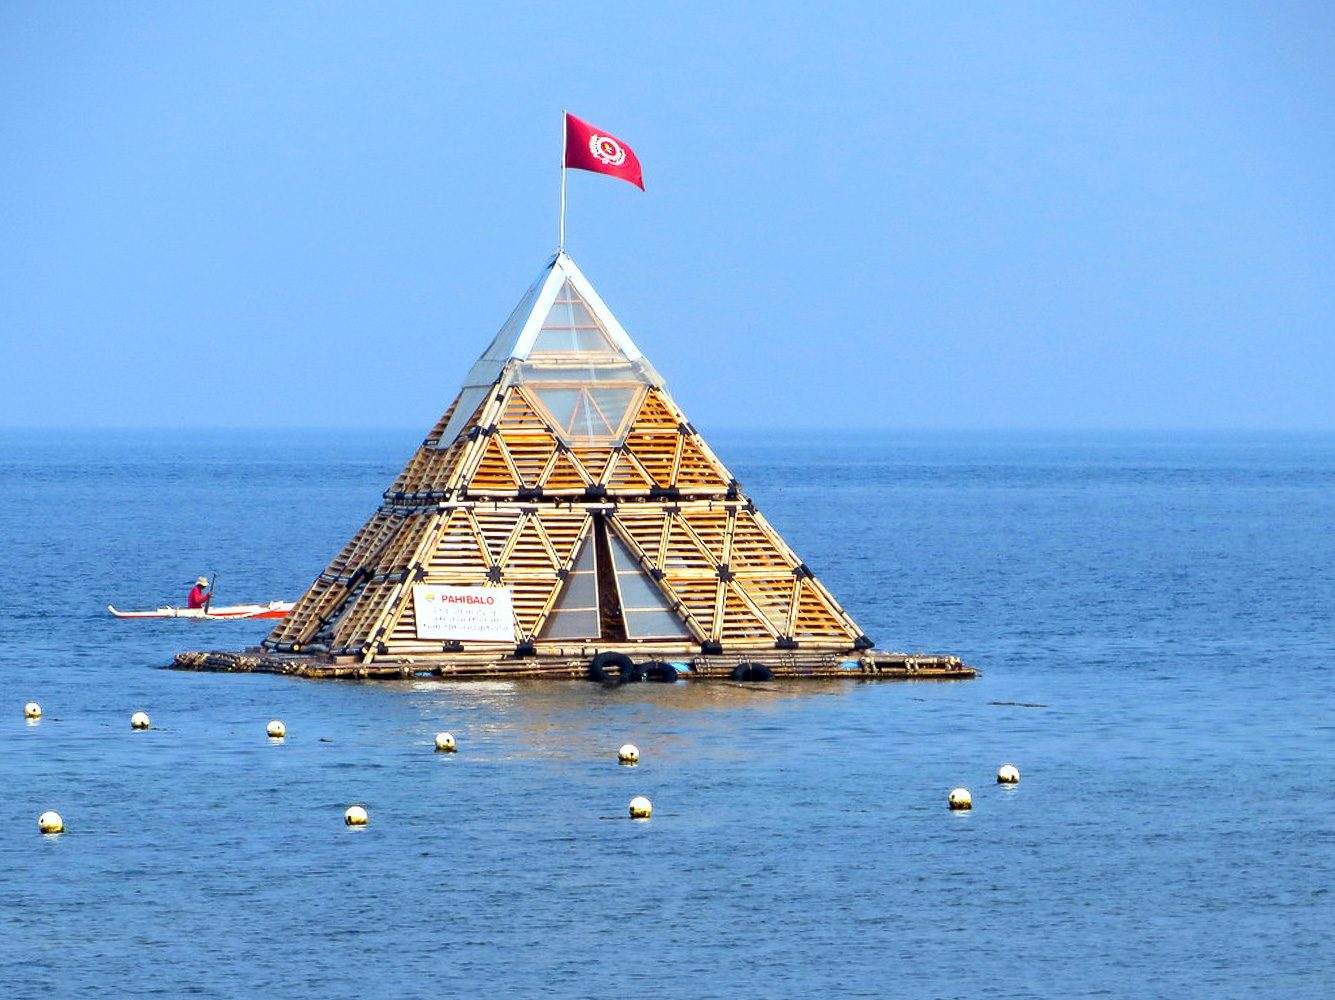 Estudio Damgo's pyramid floats offshore at Silliman Beach 